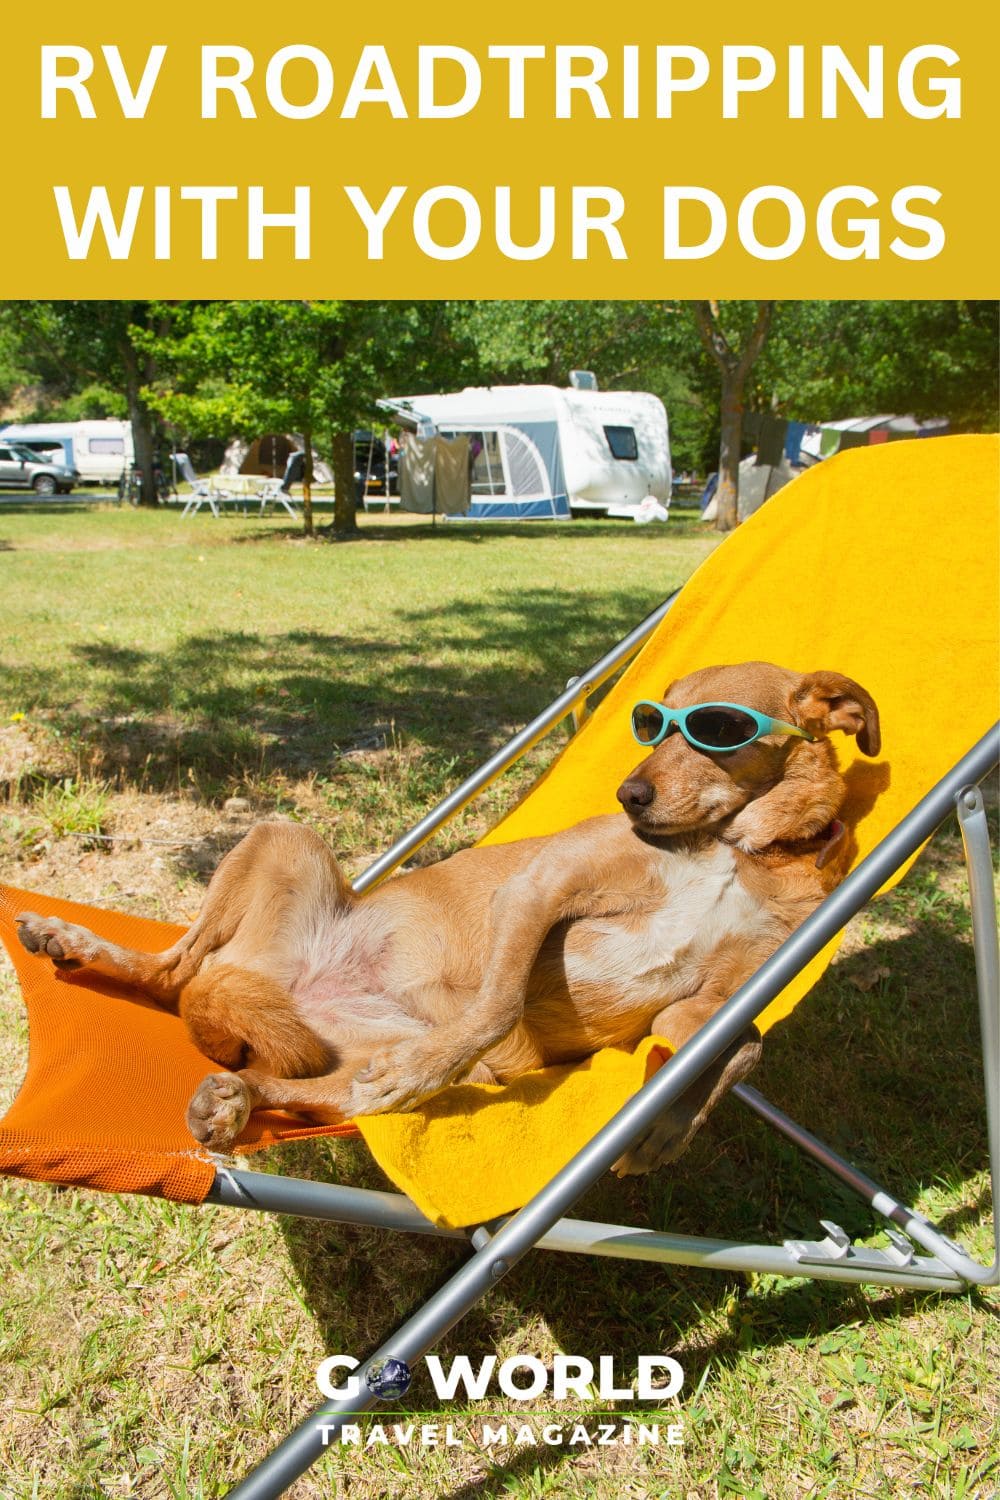 Lessons learned from RV roadtripping in Australia with two big dogs: size matters, park in the shade, find dog-friendly locations and more. #rvroadtrip #roadtripaustralia #roadtripwithdogs